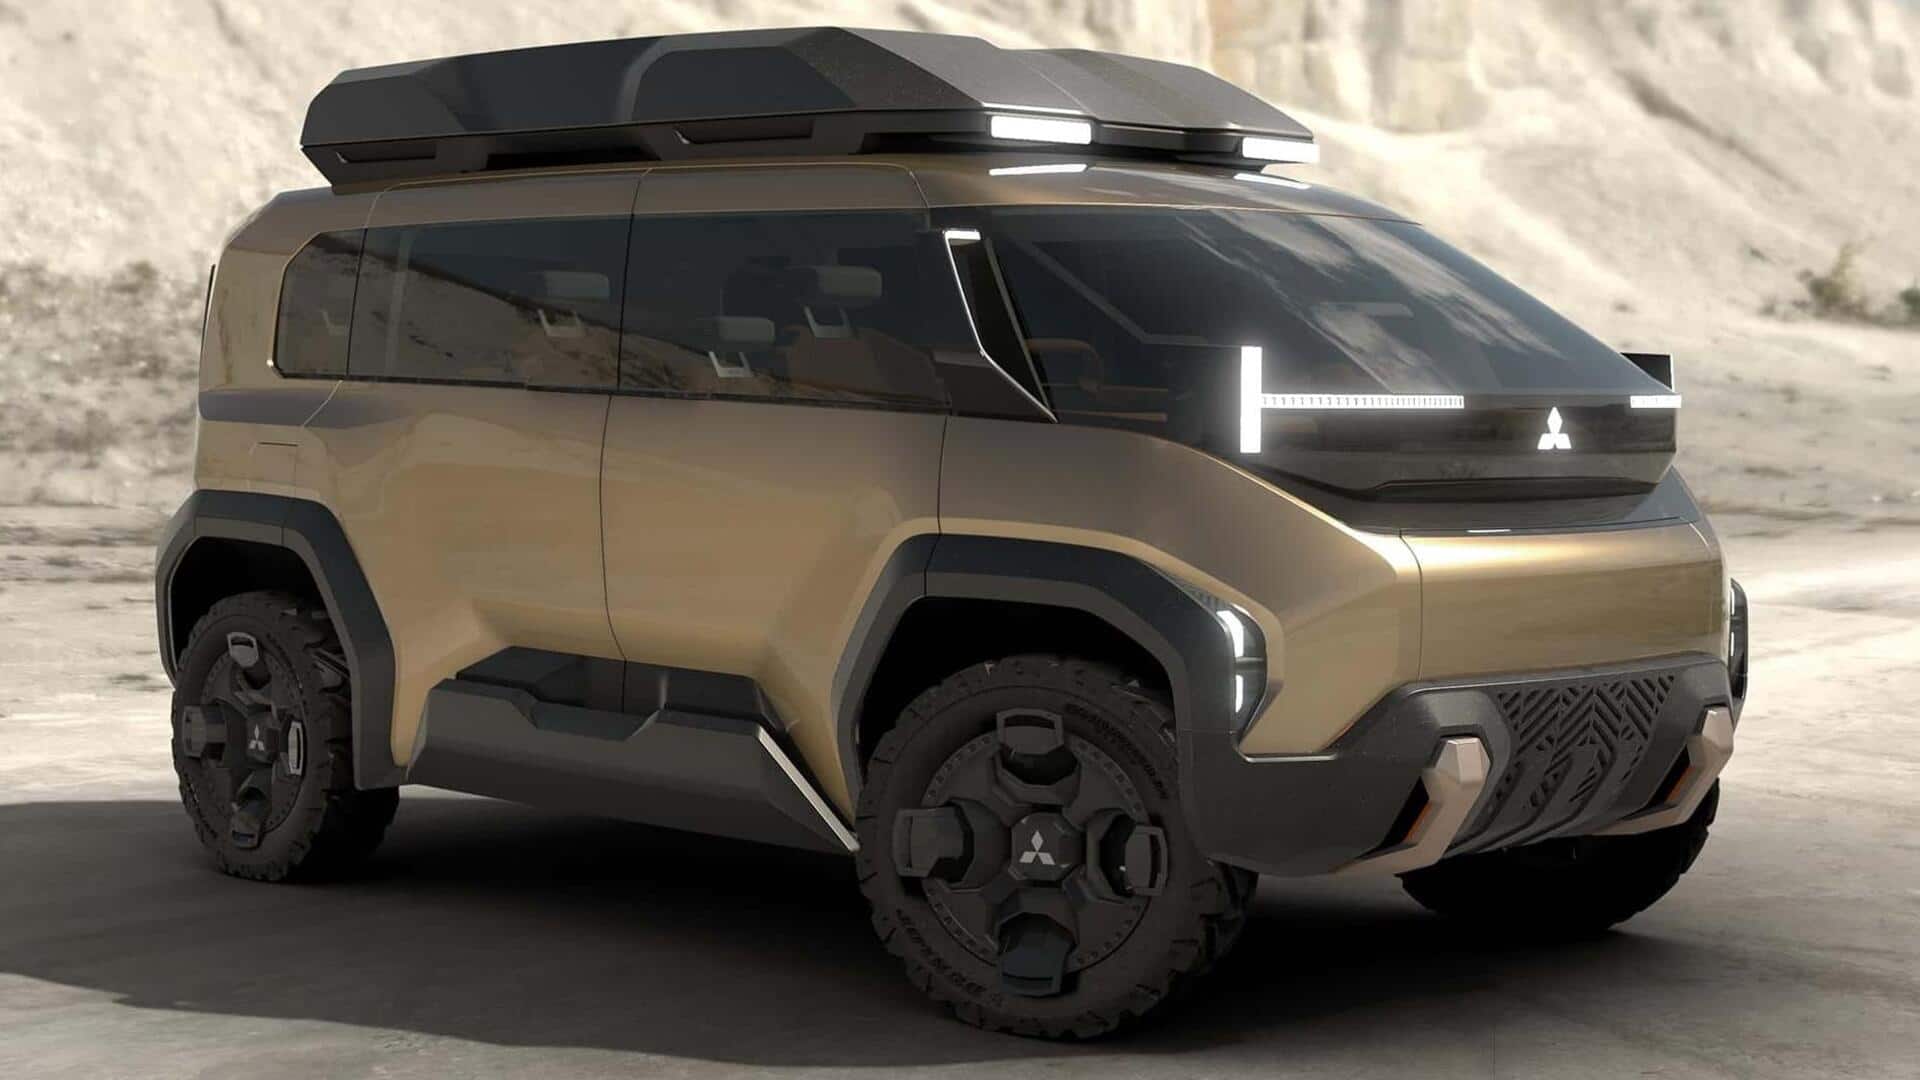 Mitsubishi D:X goes official as a rugged minivan concept